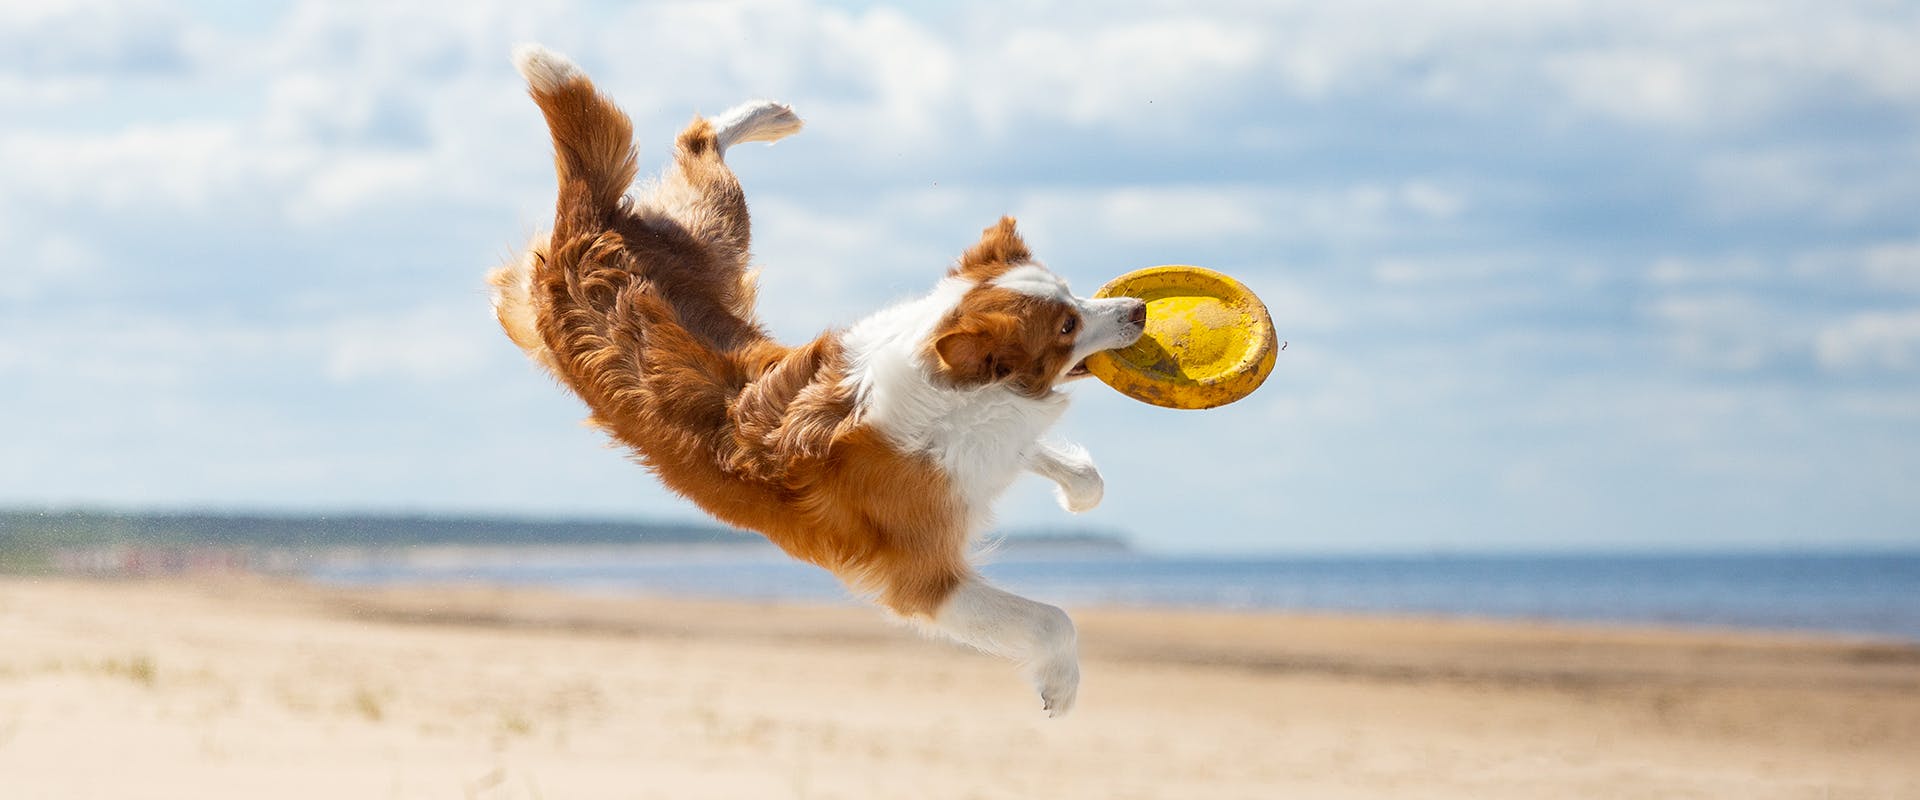 Dog catching a frisbee on the beach